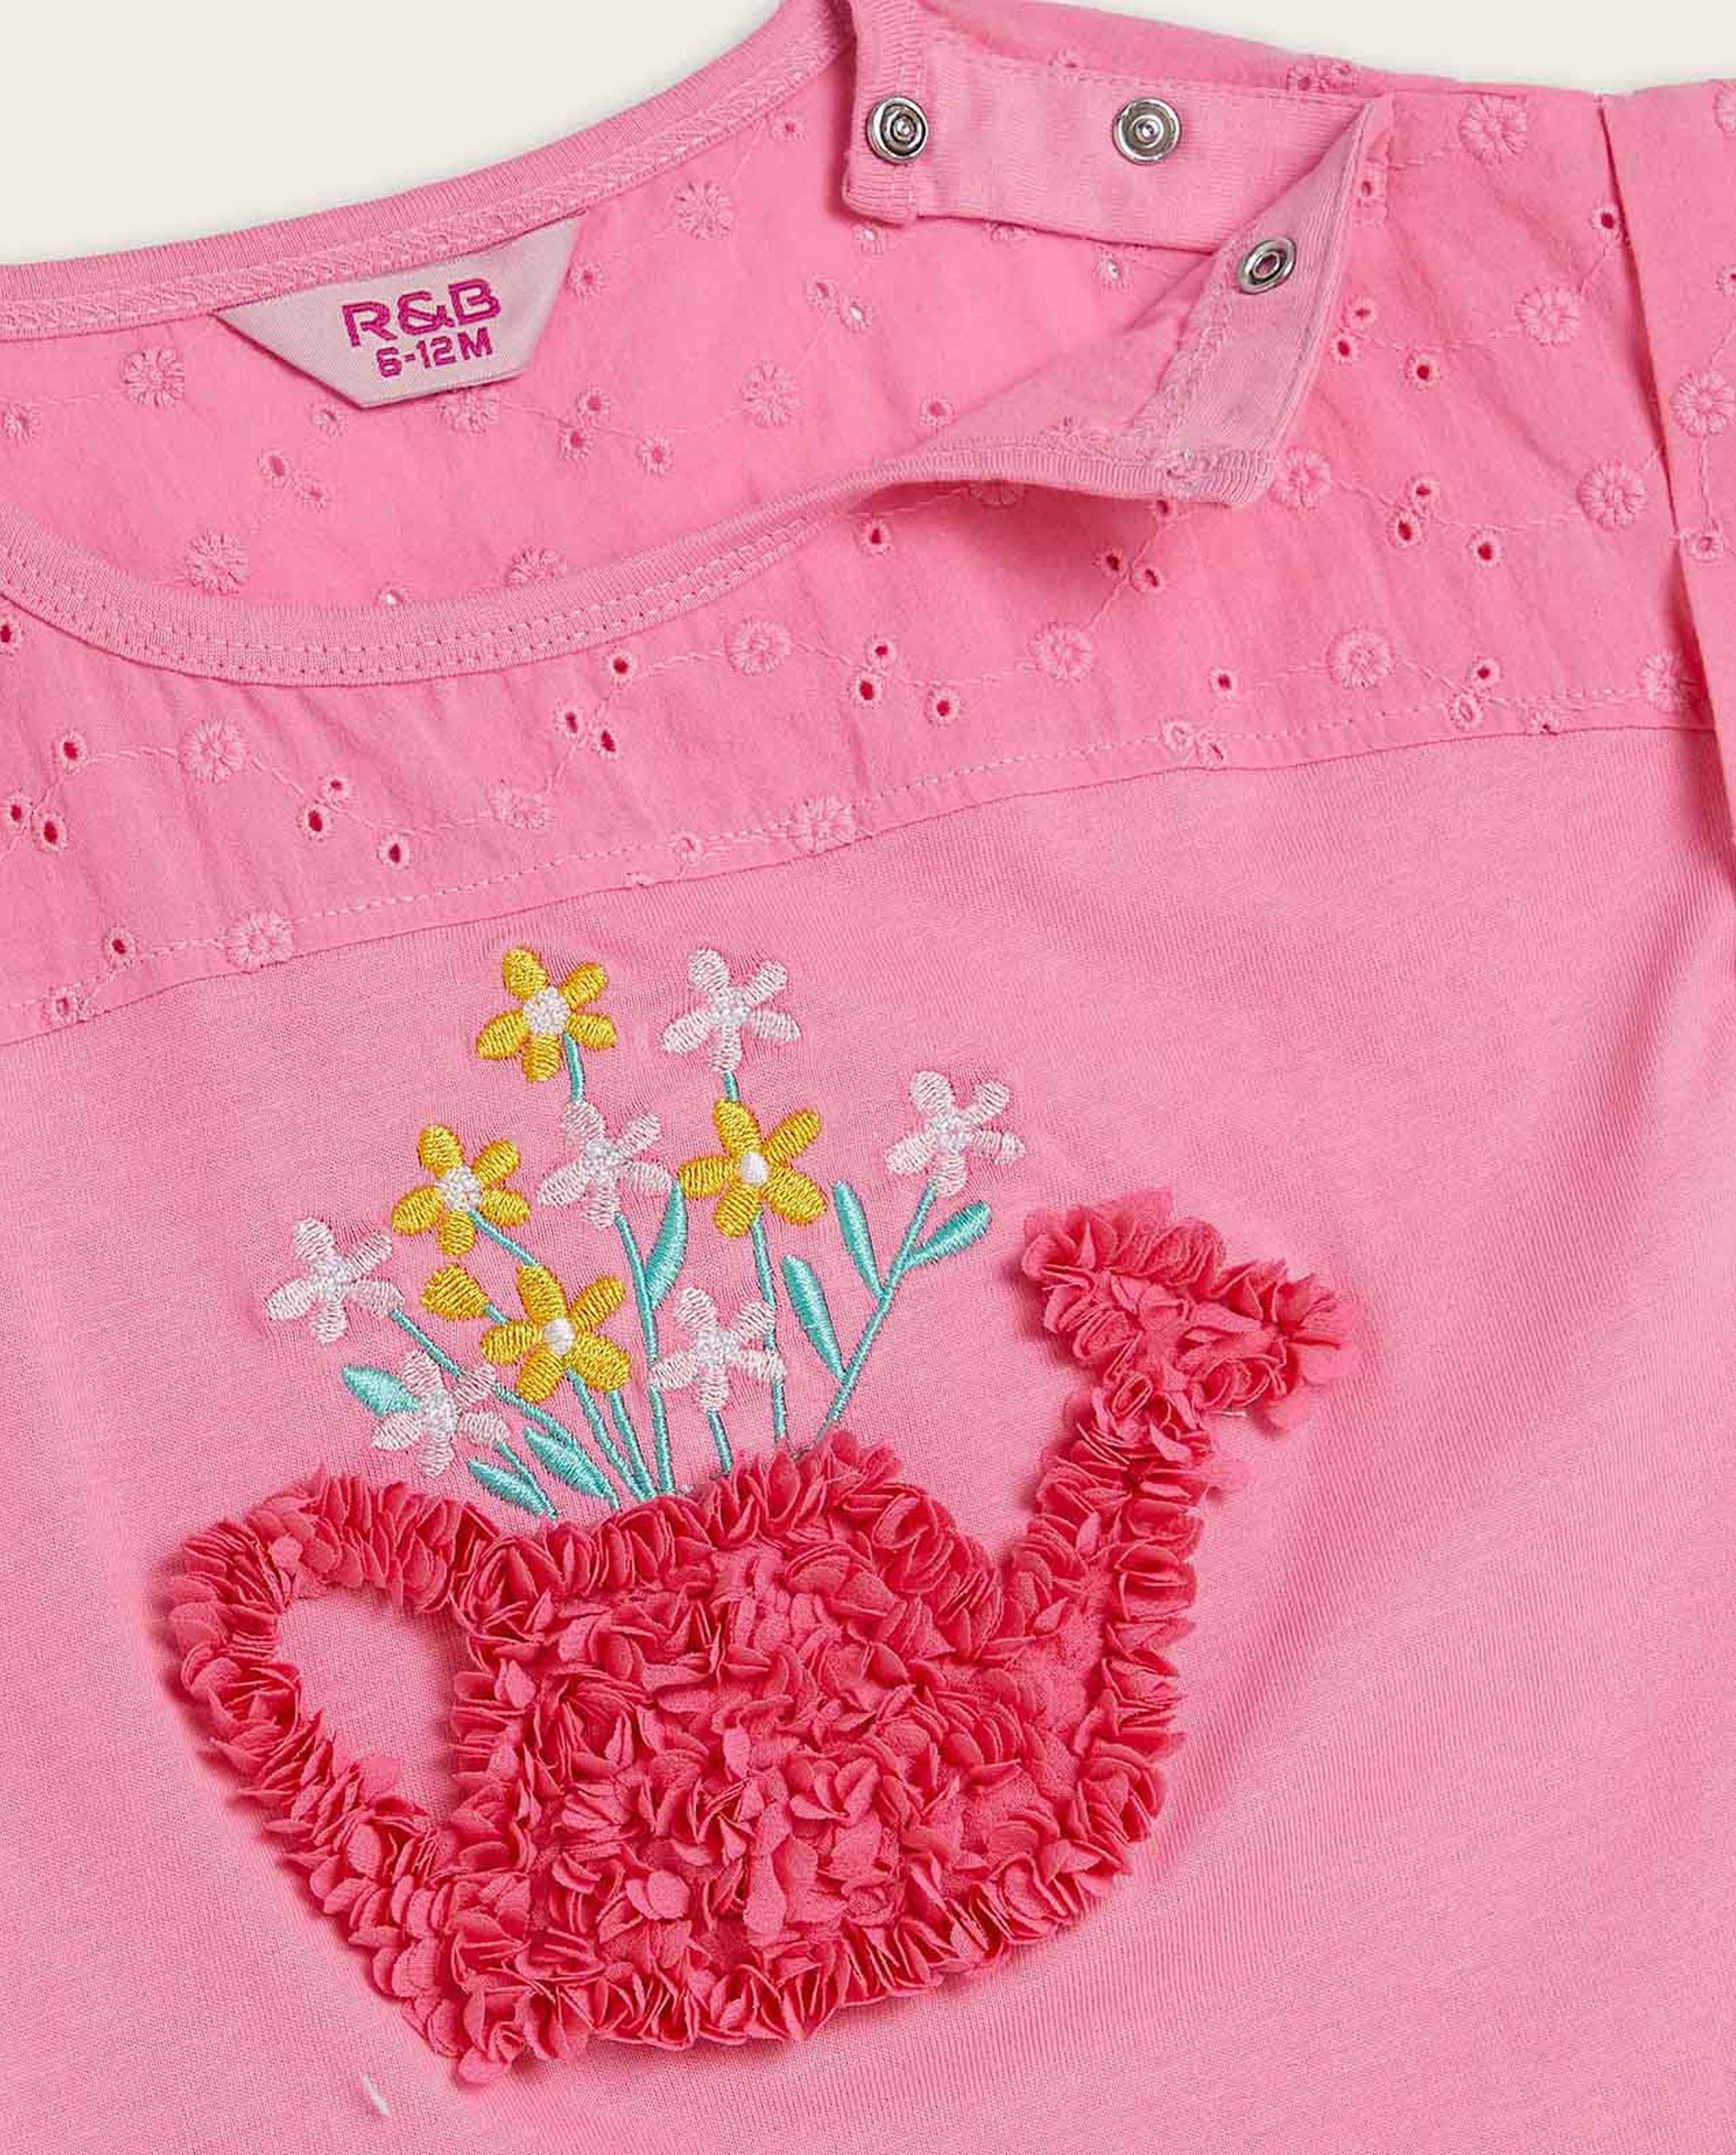 Applique Detail Top with Crew Neck and Short Sleeves